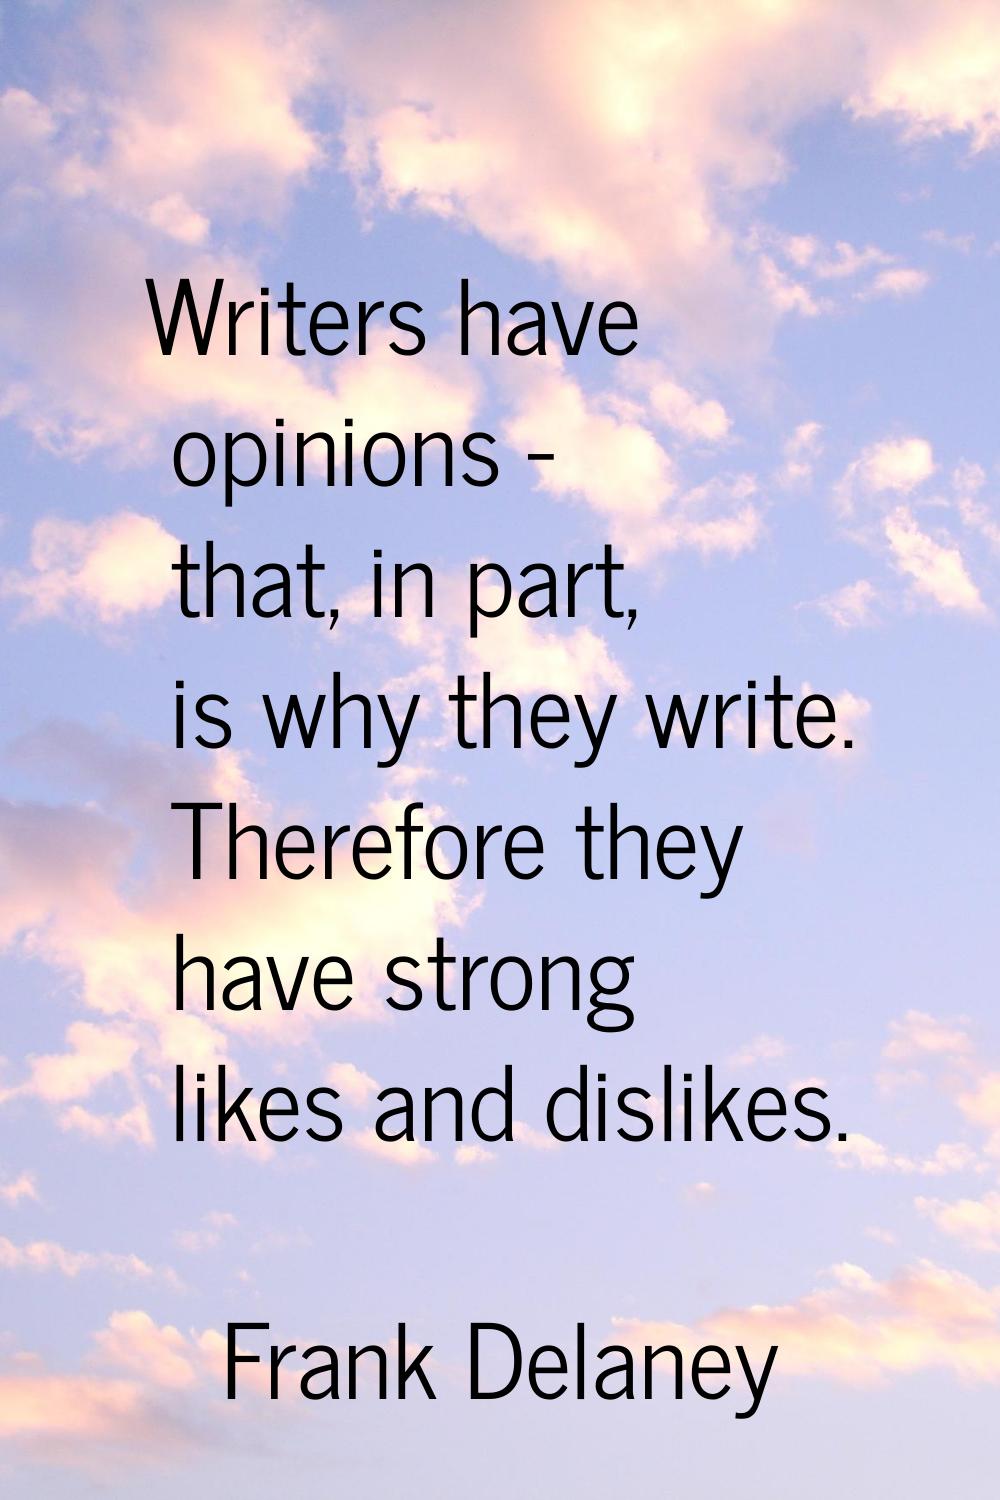 Writers have opinions - that, in part, is why they write. Therefore they have strong likes and disl